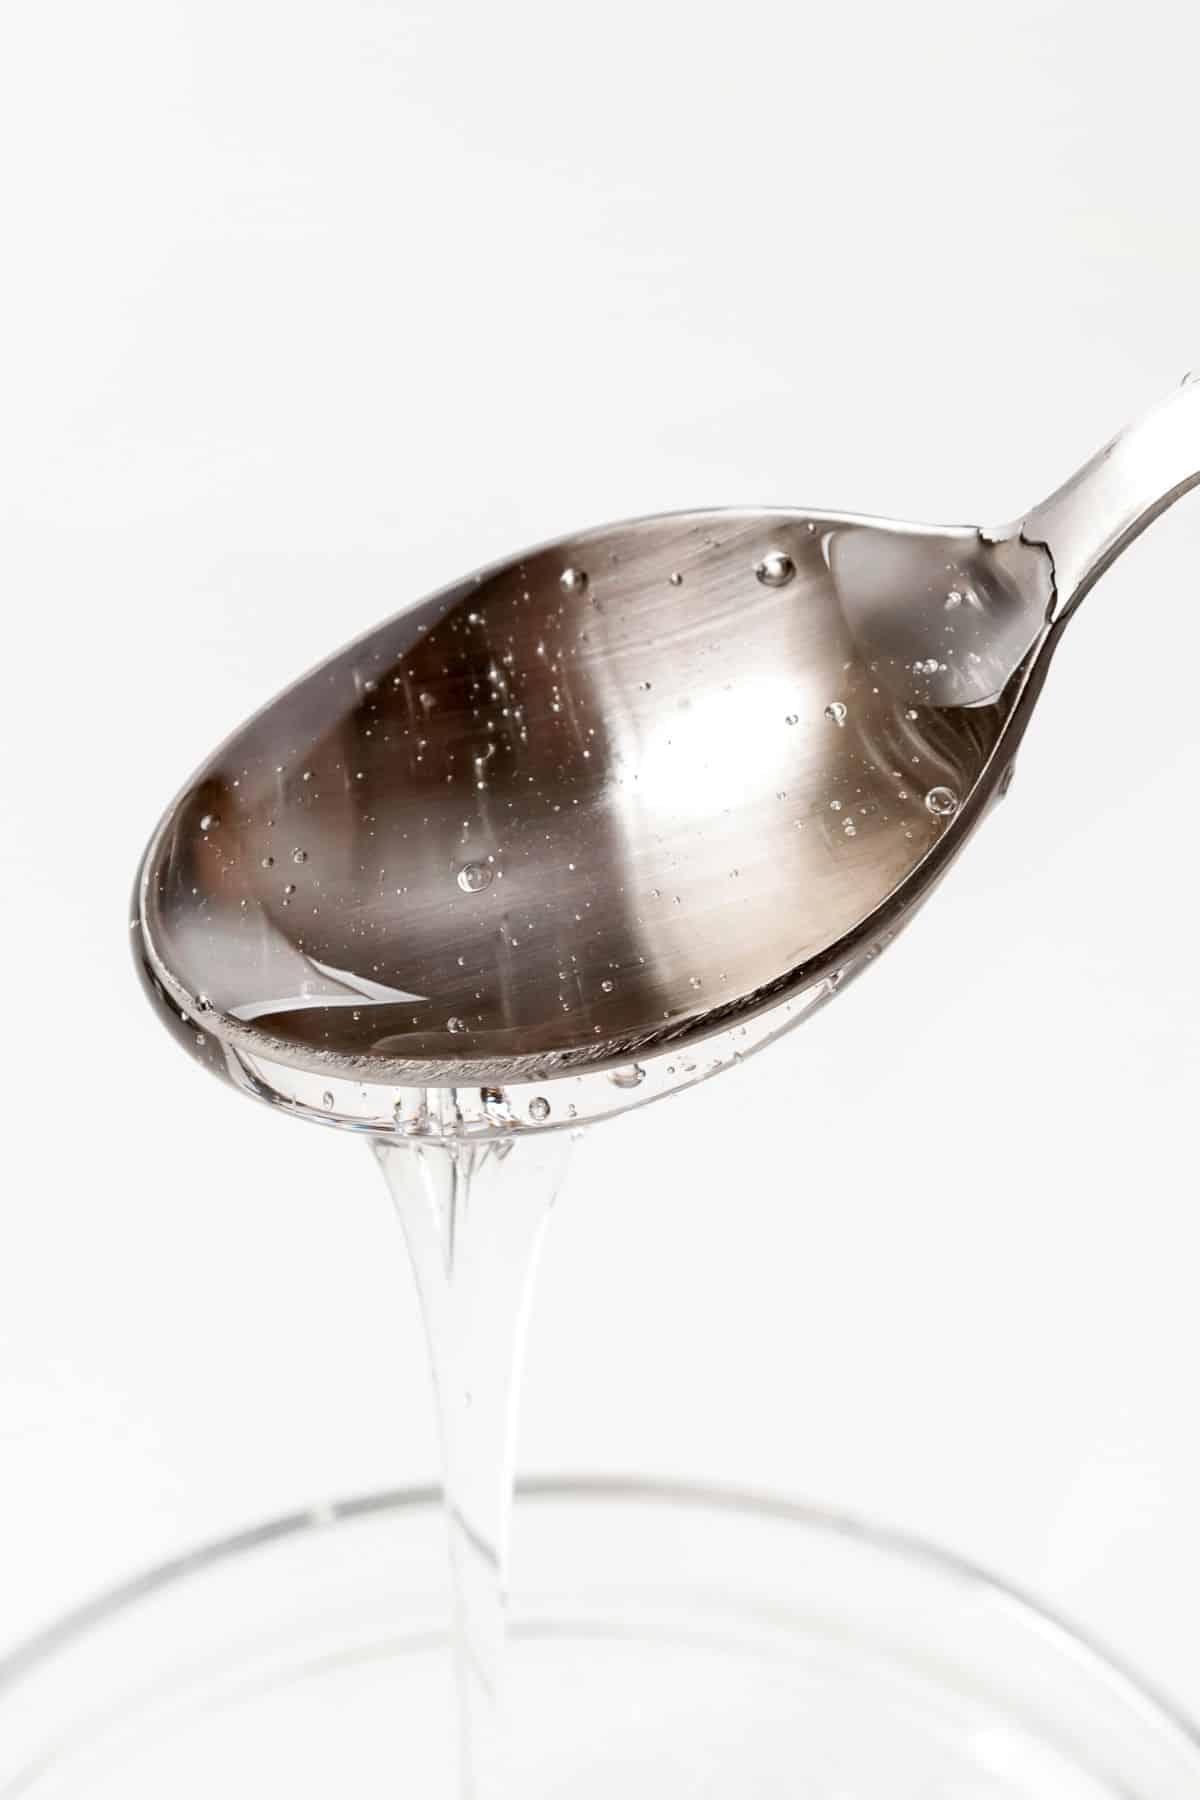 malt syrup pouring out of a spoon.